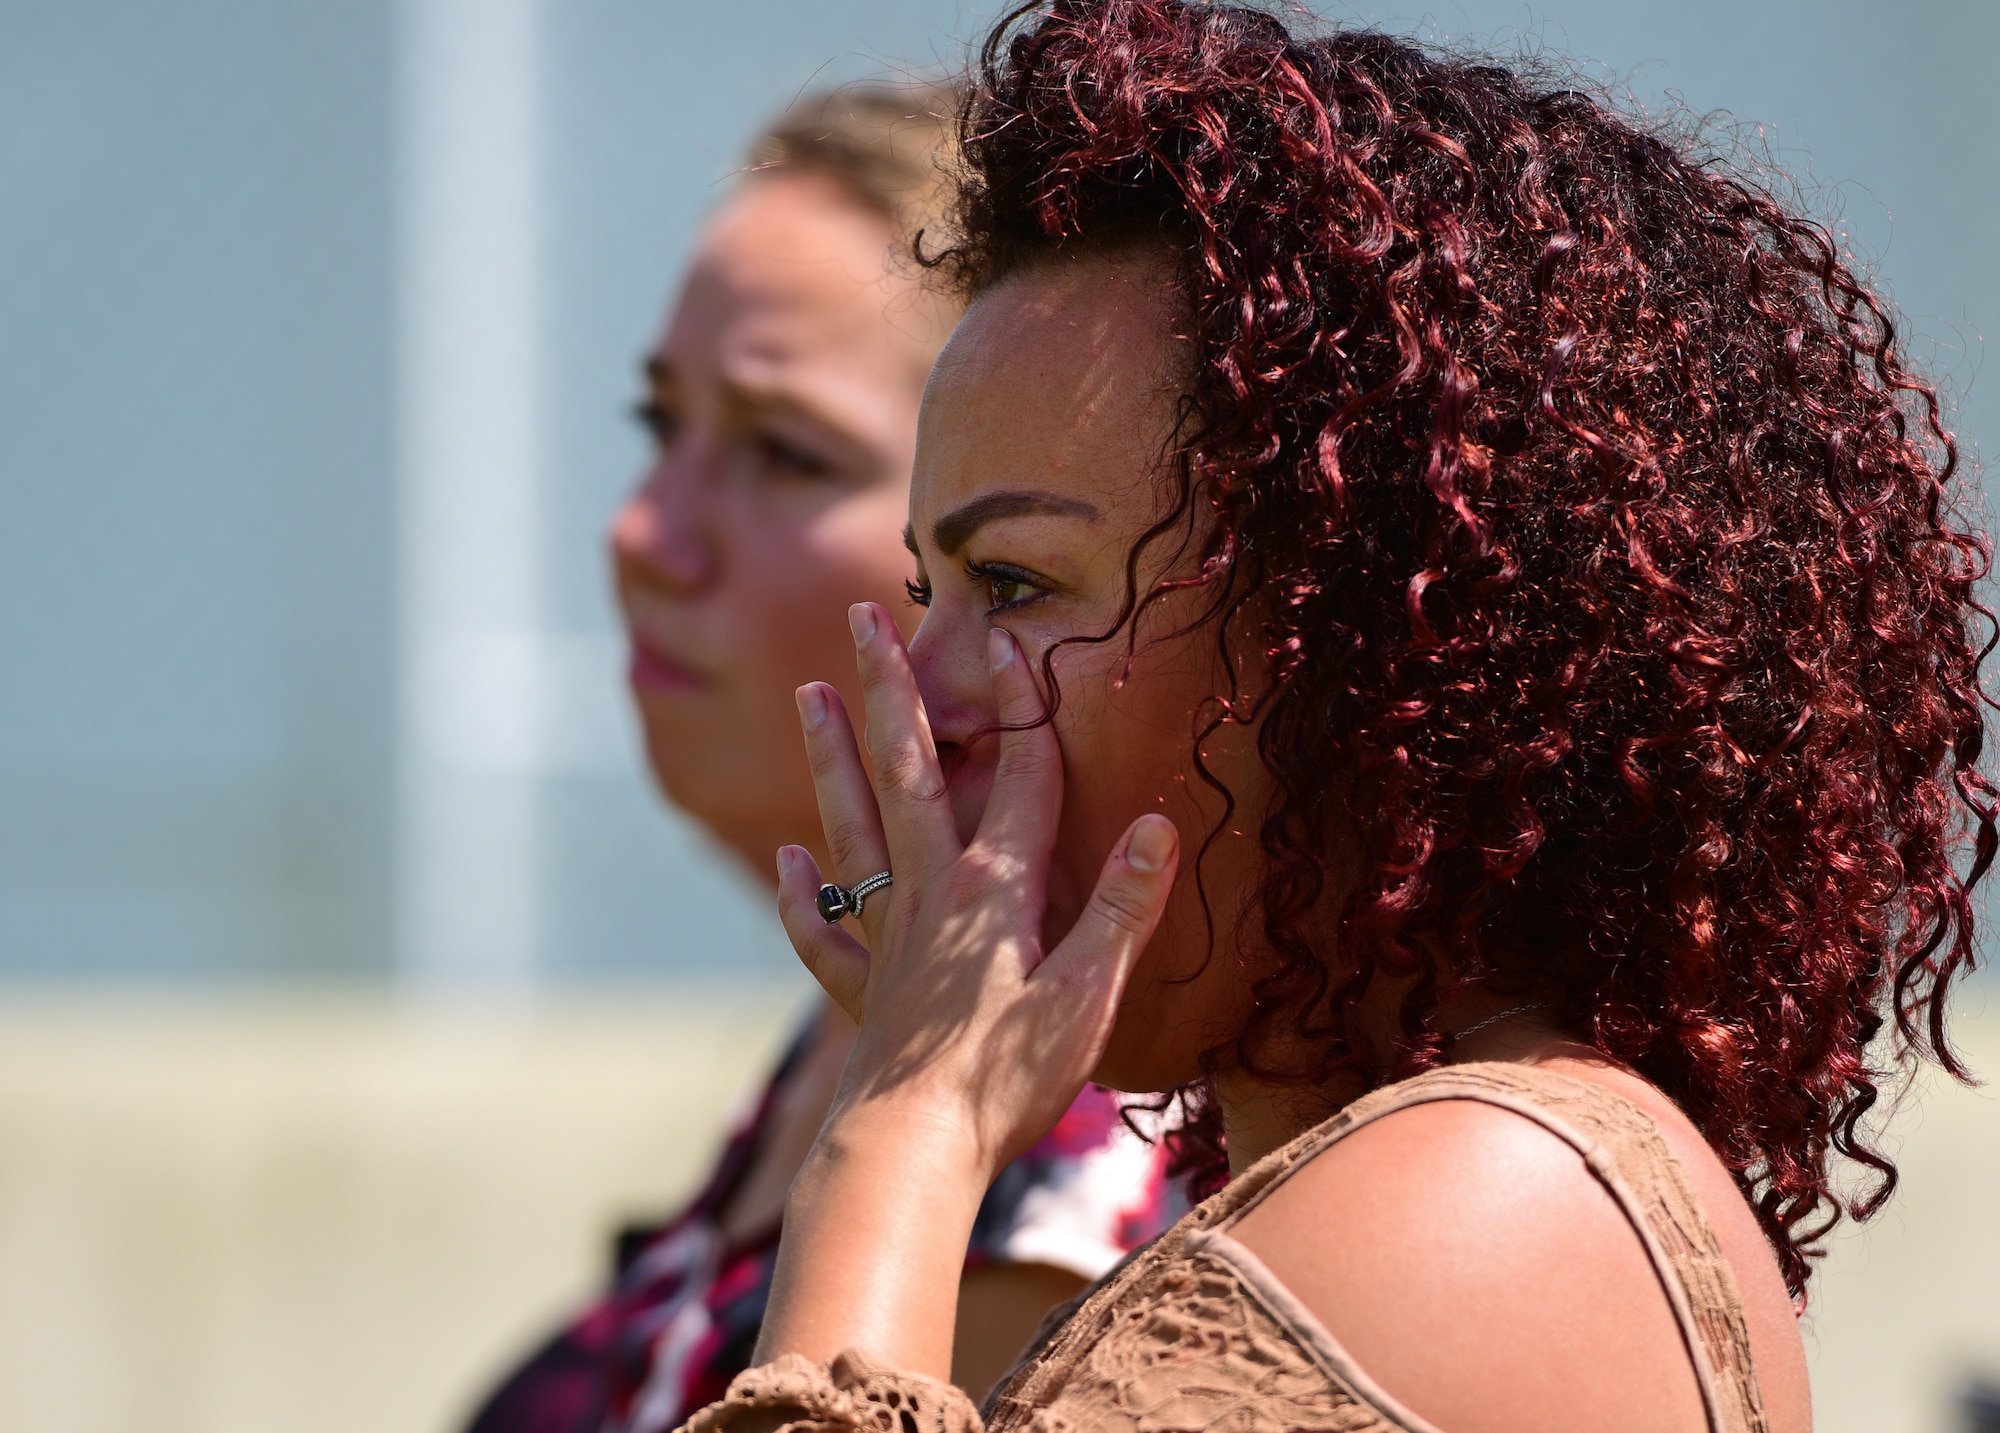 An attendee wipes away tears during a military working dog (MWD) memorial service at Tyndall Air Force Base, Fla., Sept. 7, 2018. MWD Jack was an explosives and patrol dog who shared a special bond with his handlers. MWDs enhance Security Forces capabilities to protect resources, enforce military laws, suppress drugs, detect explosives and protect installations. (U.S. Air Force photo by Senior Airman Isaiah J. Soliz)